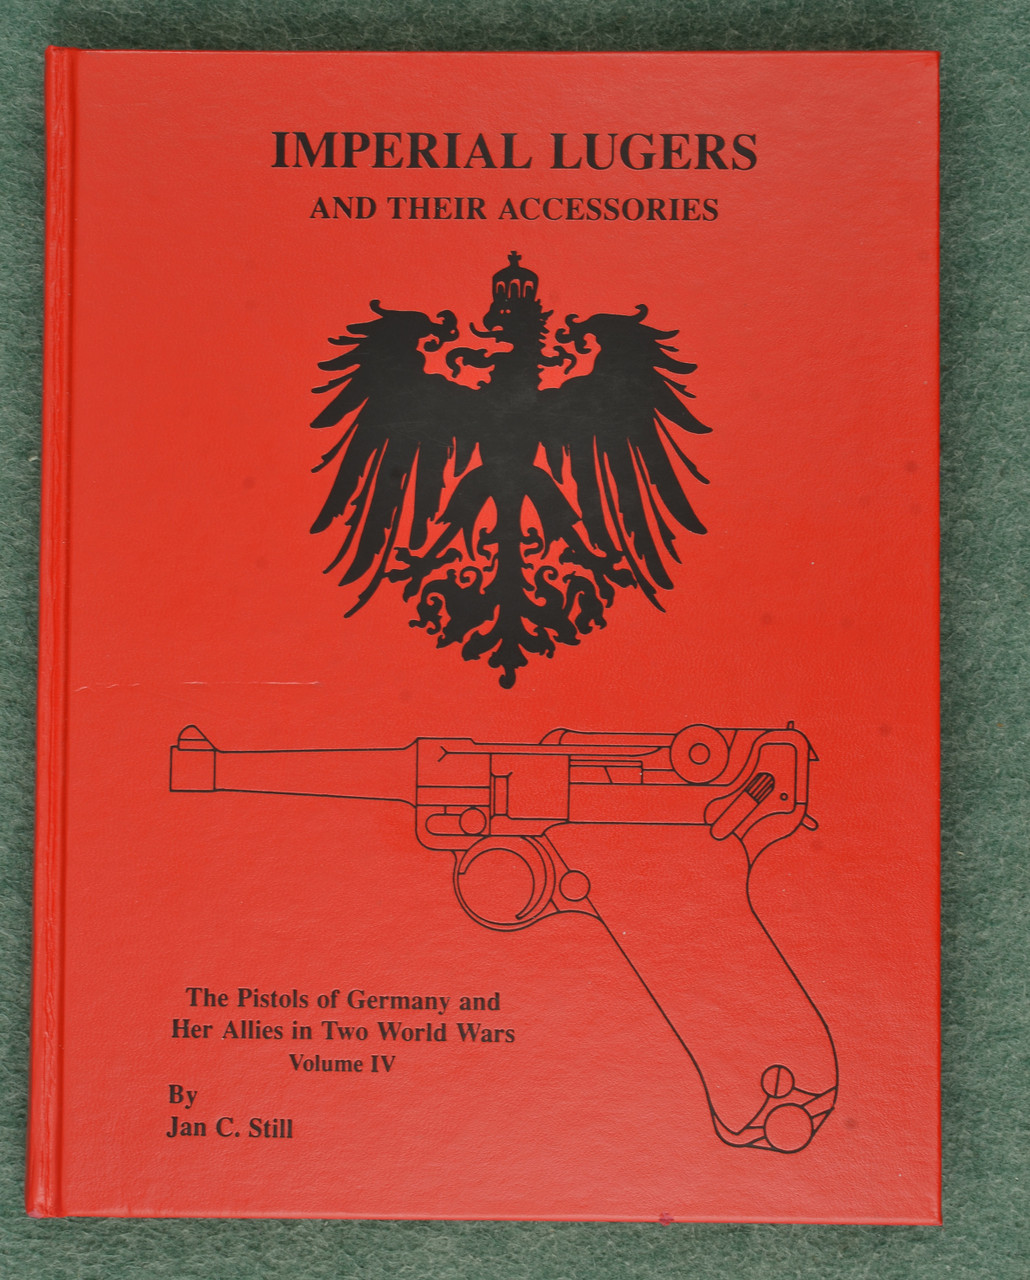 BOOK IMPERIAL LUGERS - C54865